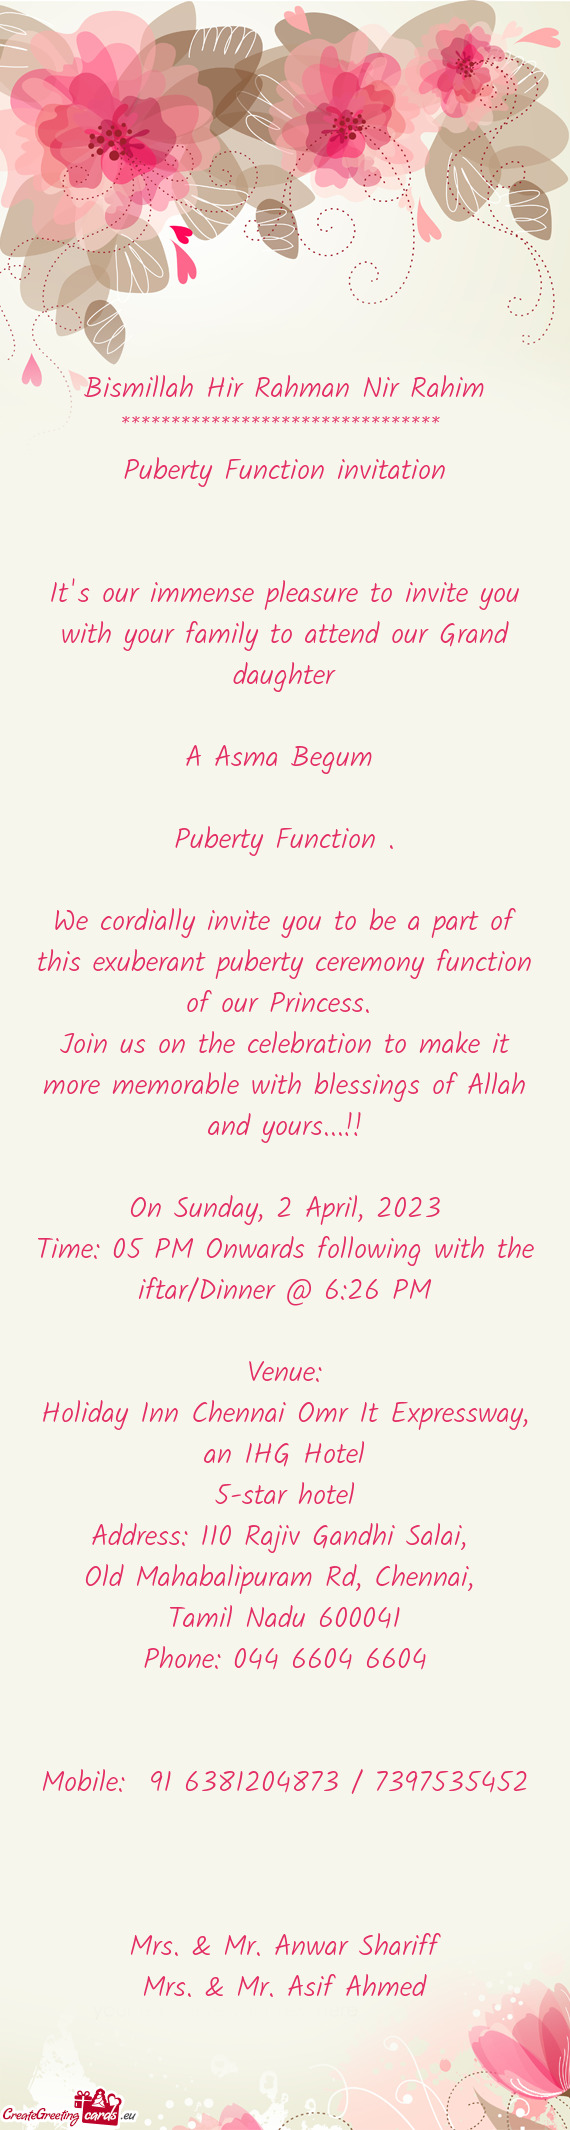 Join us on the celebration to make it more memorable with blessings of Allah and yours